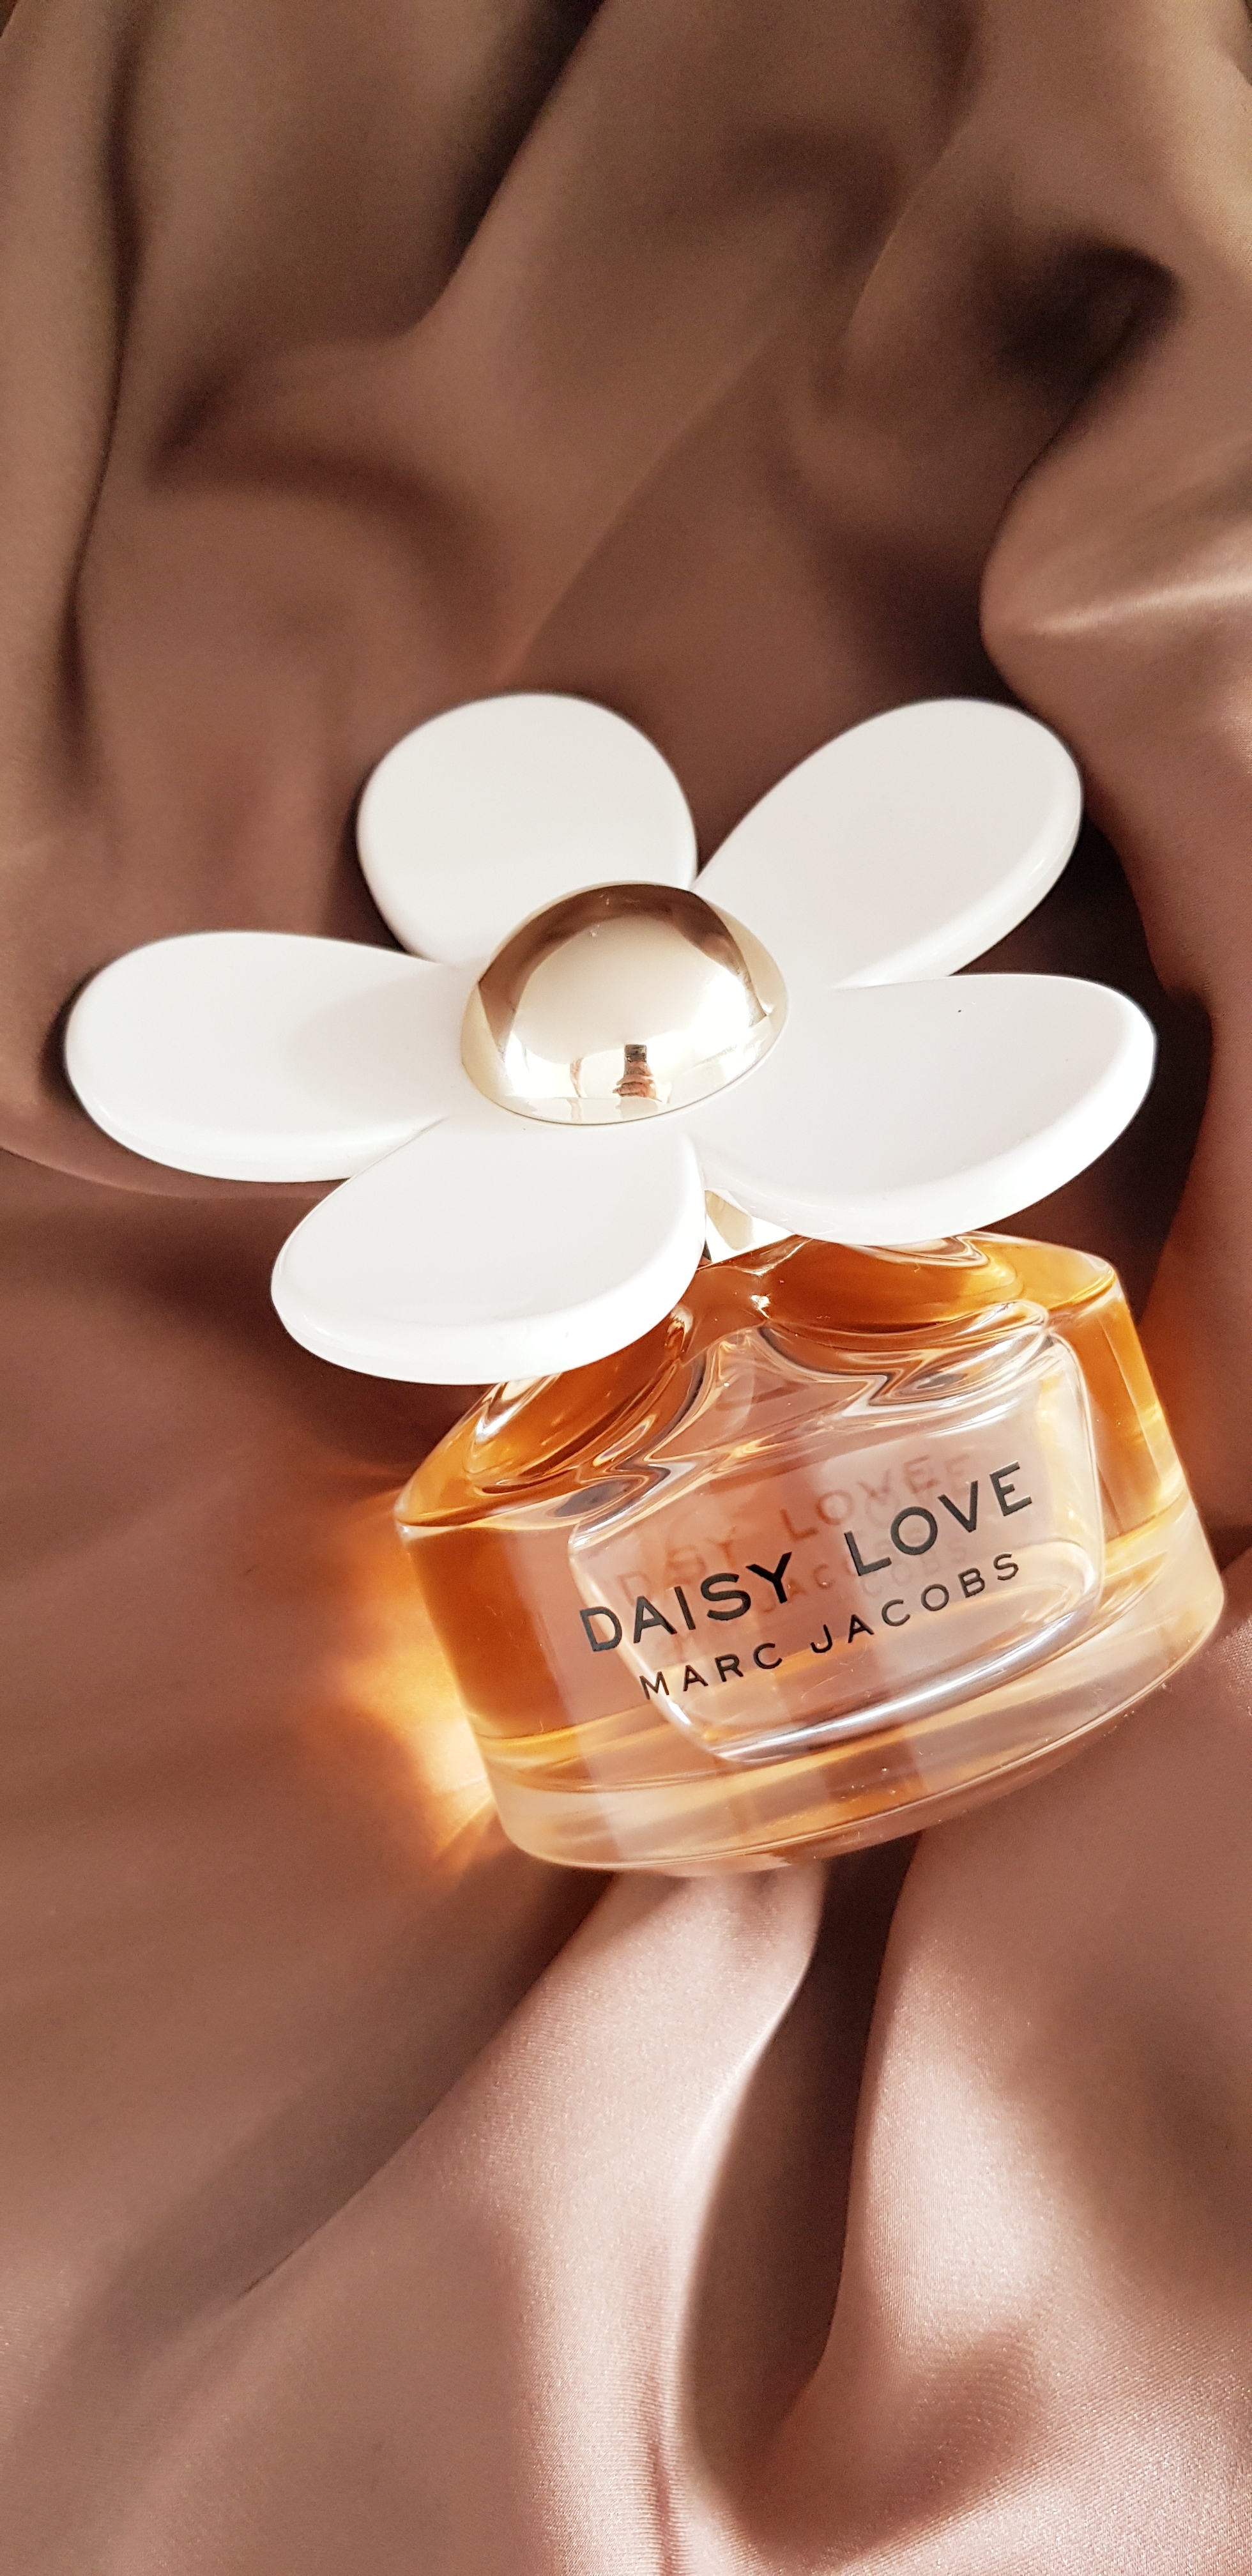 Daisy Love EDT by Marc Jacobs - Ms Tantrum Blog